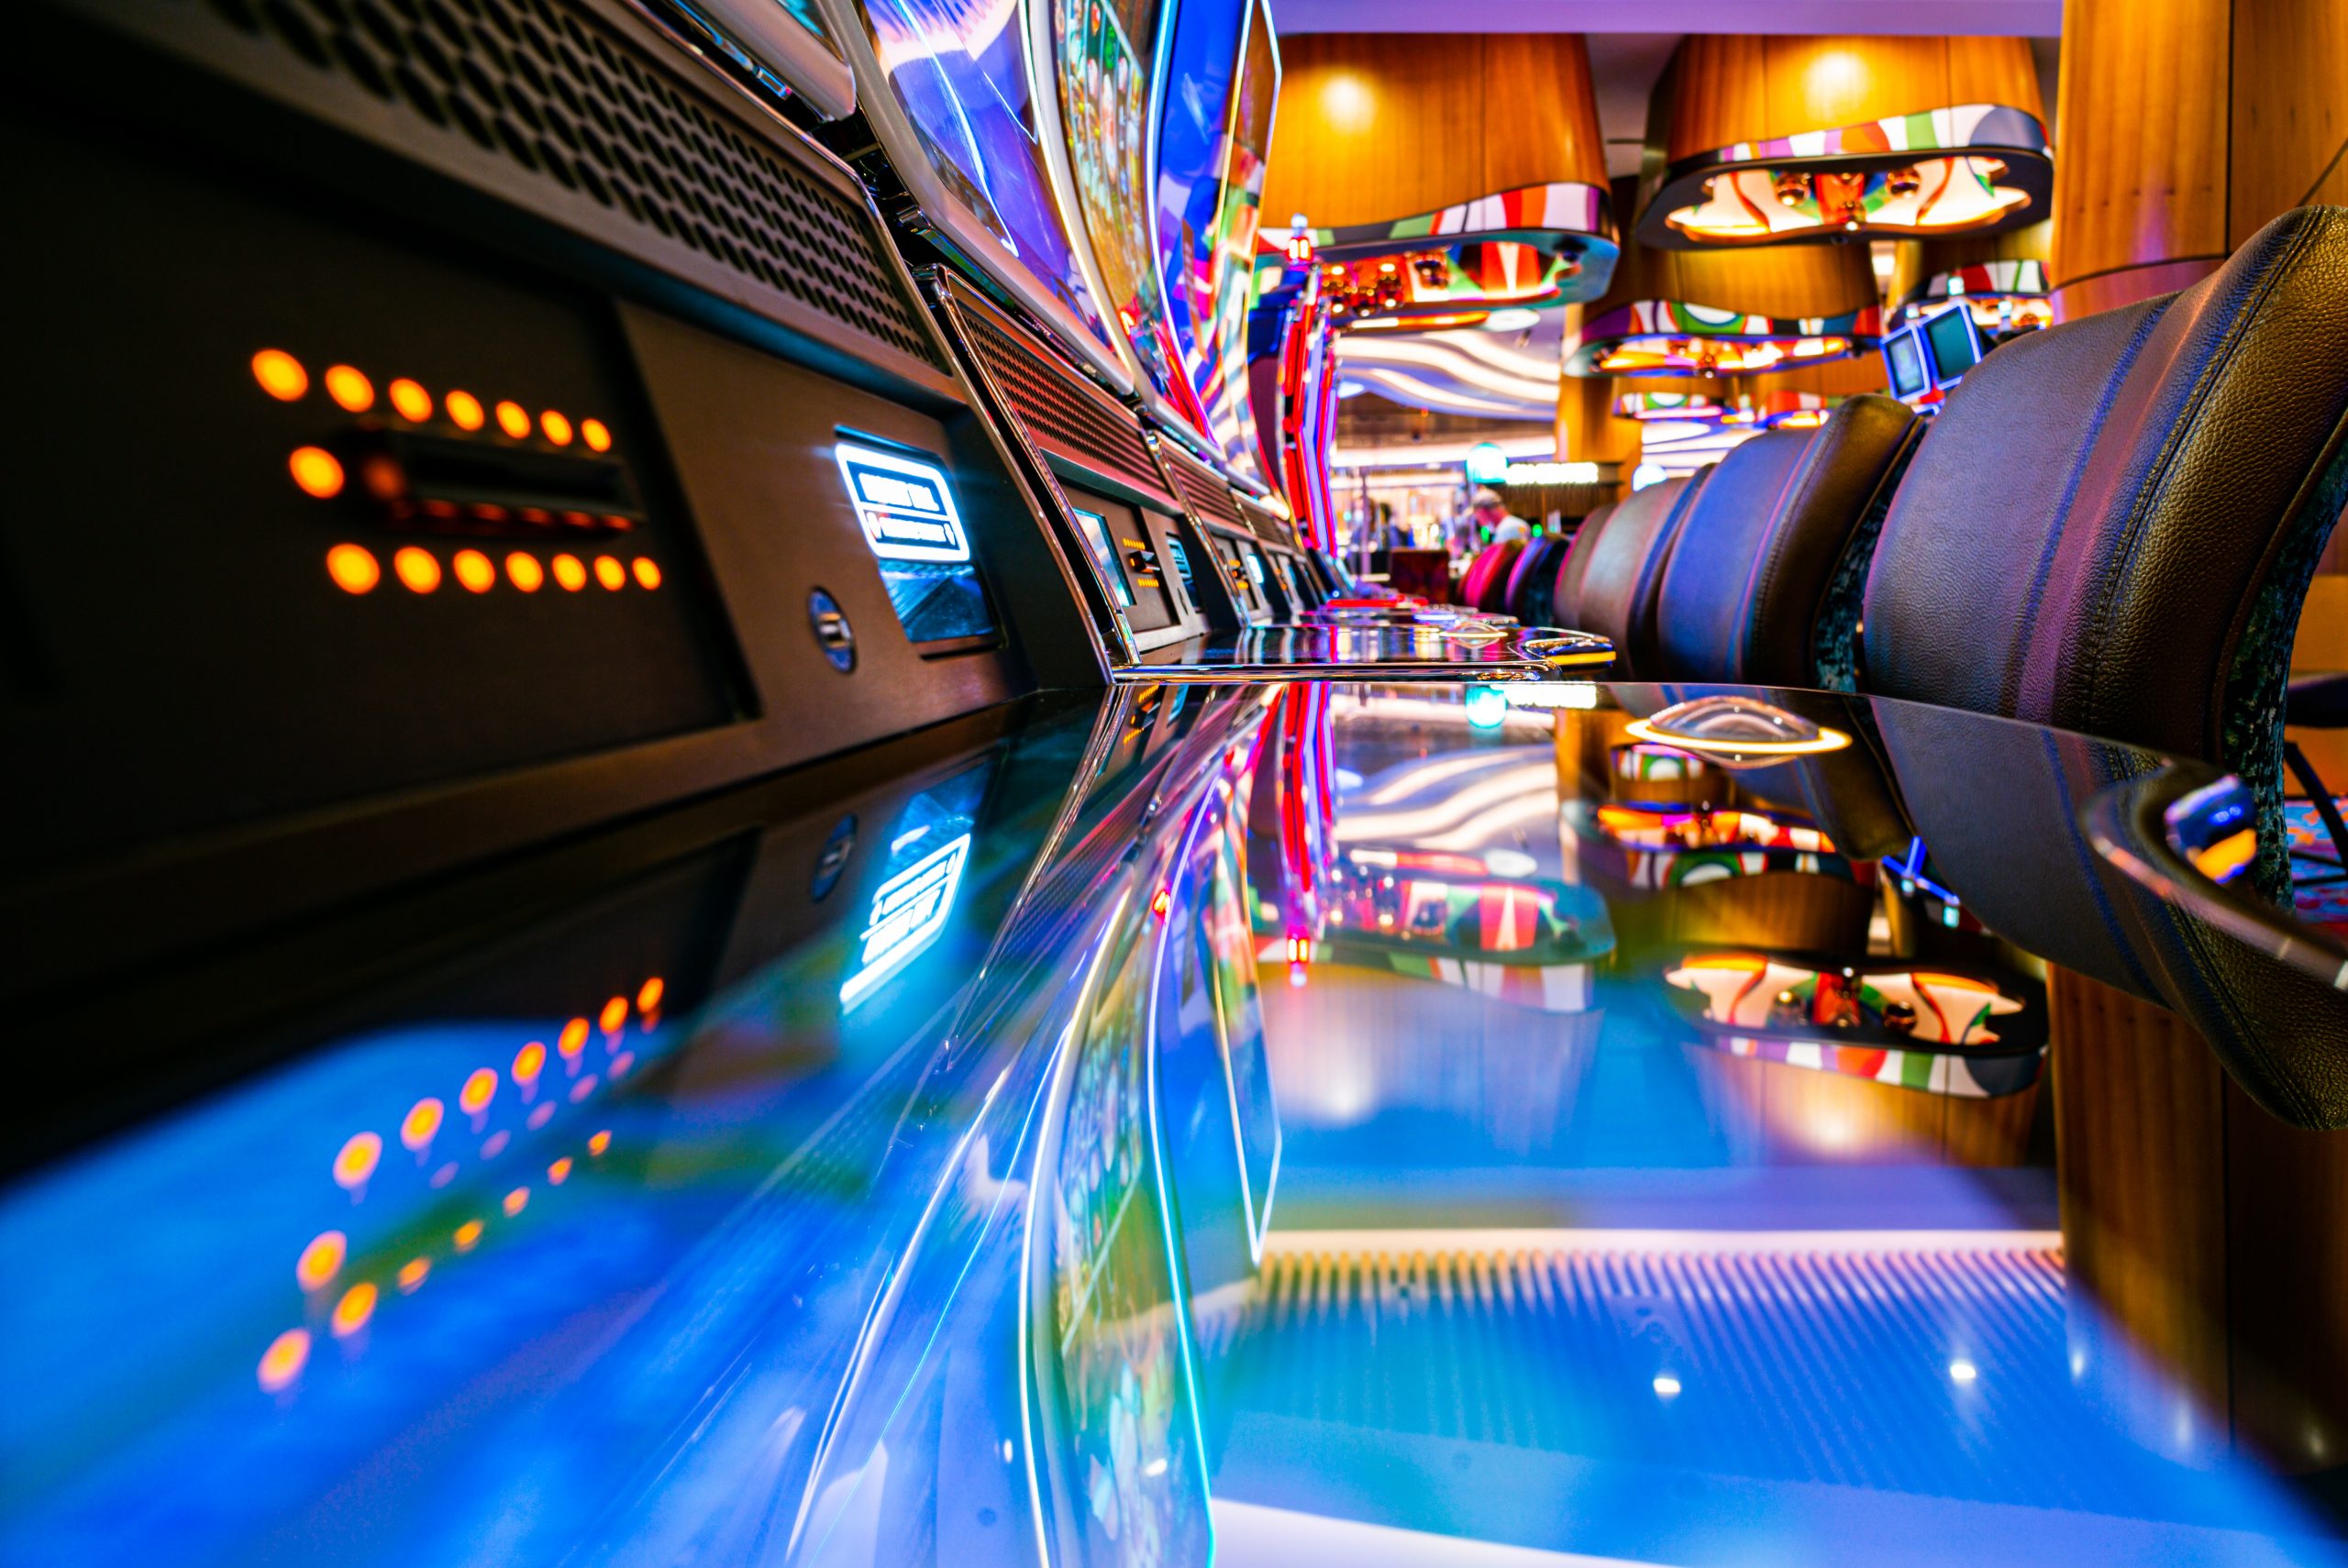 The Types of Casino Games Available on Cruise Ships